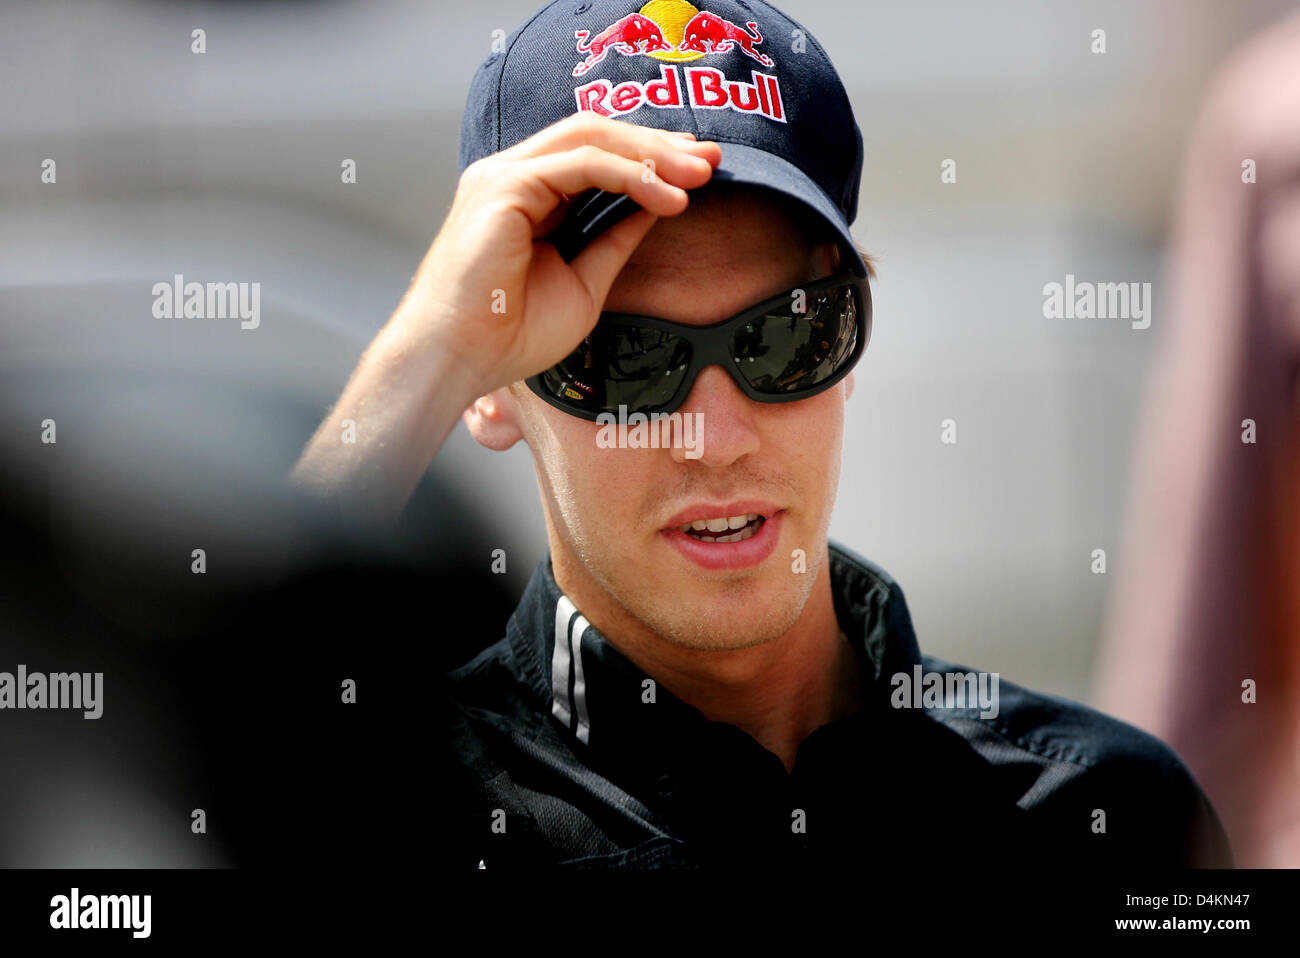 German Formula One driver Sebastian Vettel of Red Bull Racing is pictured during the drivers parade prior to the start of the Formula One Grand Prix of Spain at Circuit de Catalunya in Montmelo near Barcelona, Spain, 10 May 2009. Photo: Jan Woitas Stock Photo